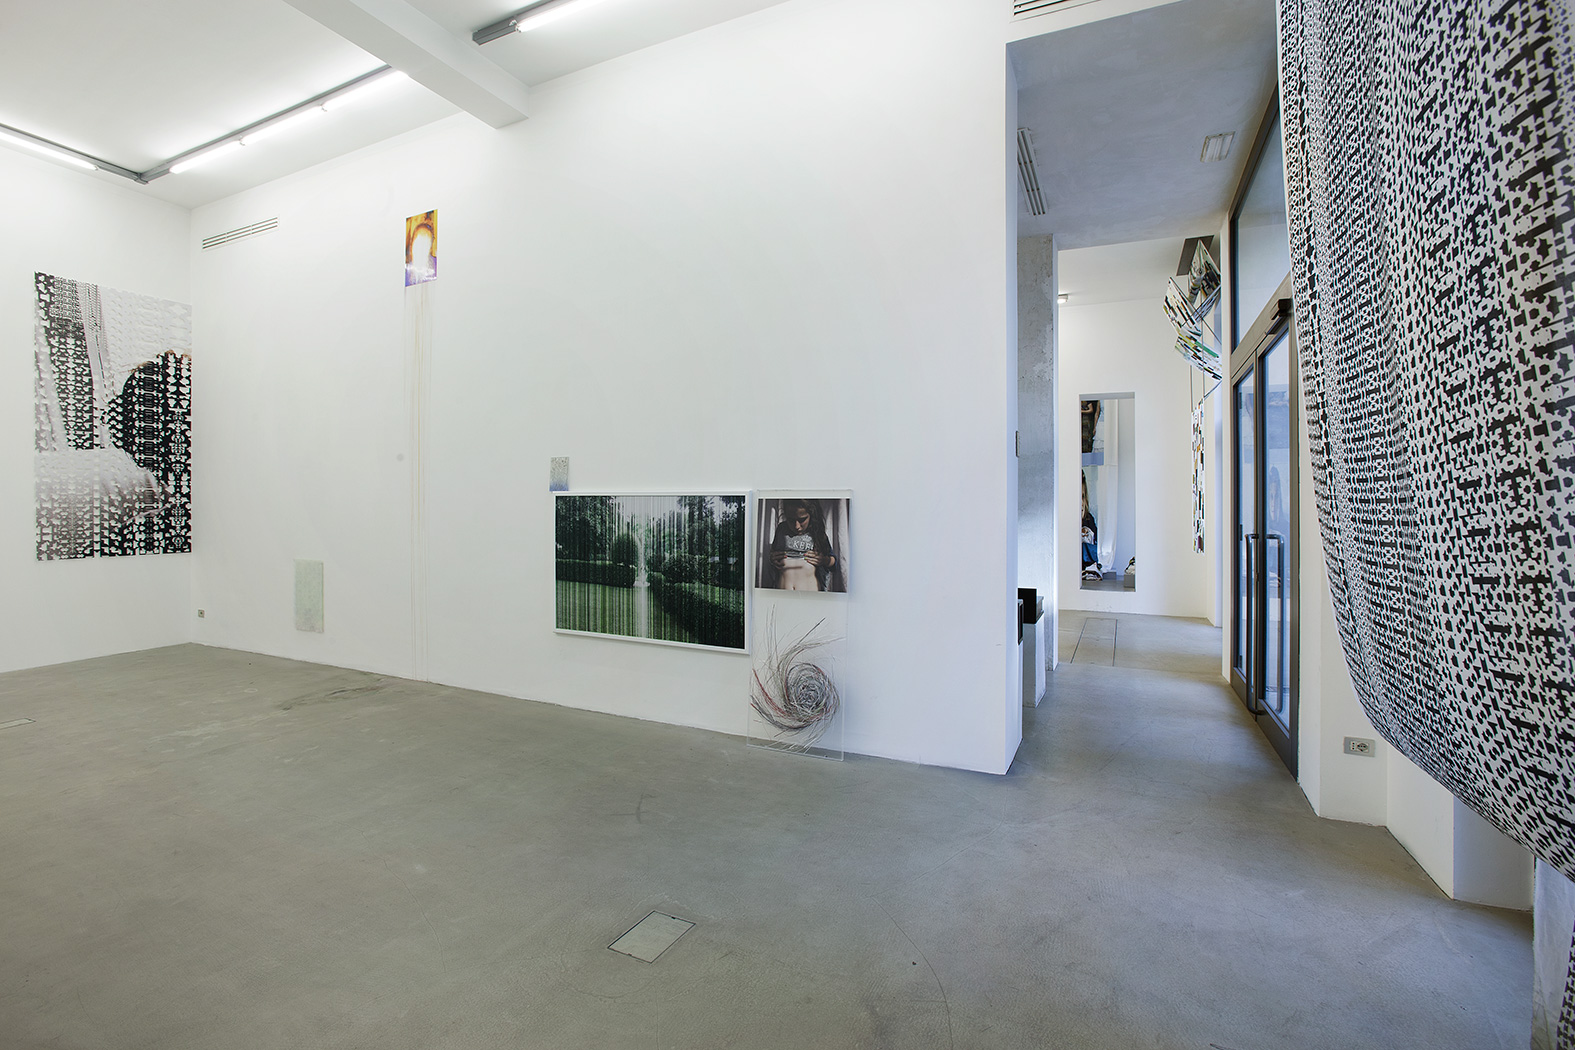 <p>General view of Doing life installation_2012, main exhibition space 1. On right: By way of organized emptiness_2012, printed cotton   </p>
